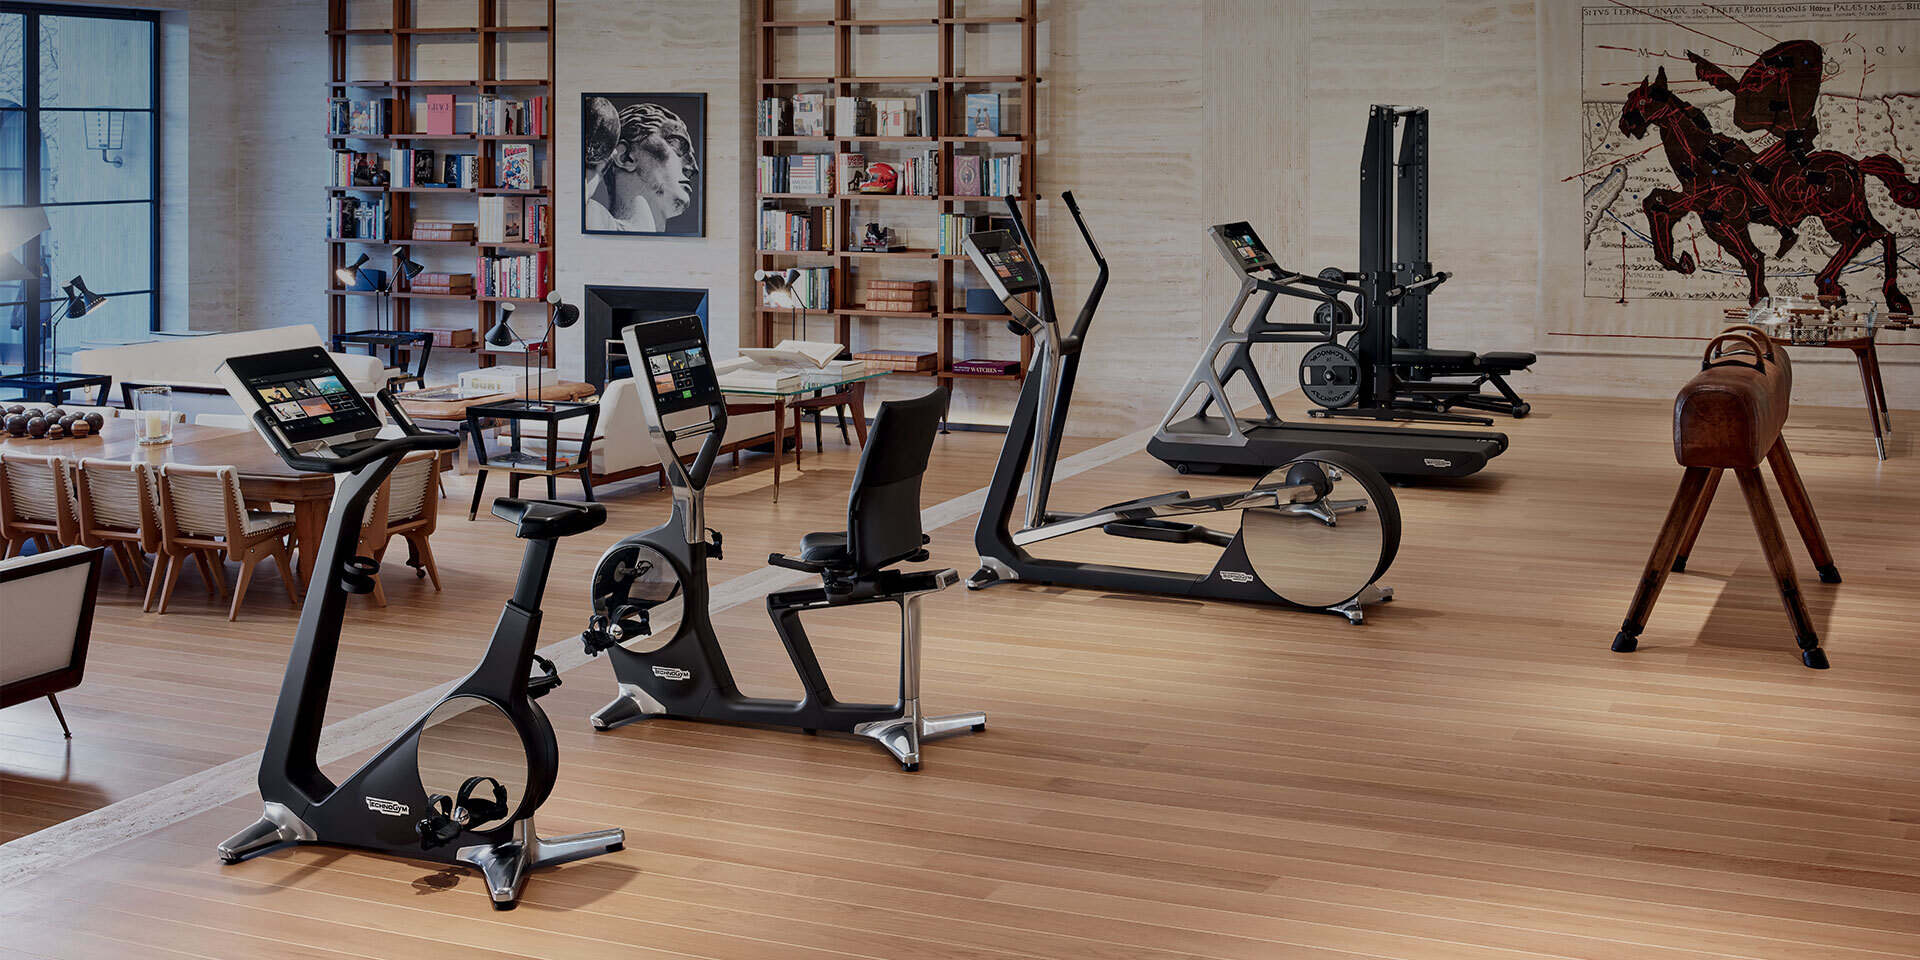 High quality fitness equipment manufacturer in India, Discover superior  fitness solutions from India's top manufacturer